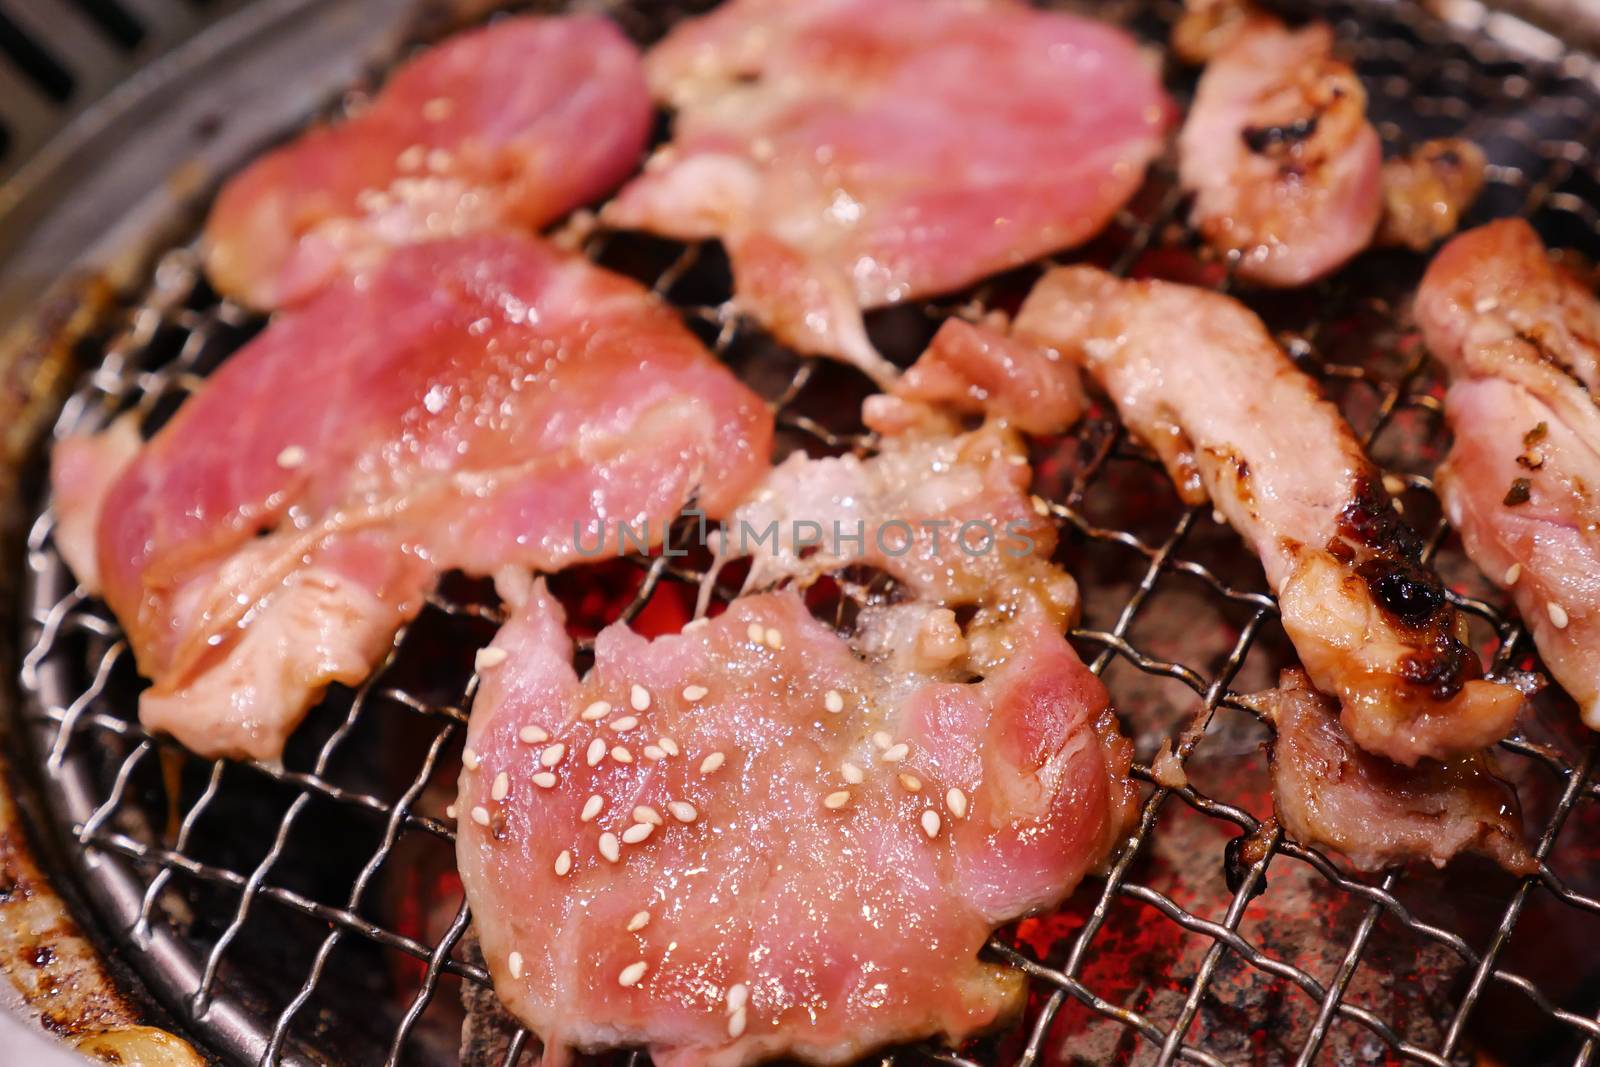 Pork grill on hot coals. This kind of food is a Korean or Japanese BBQ style.